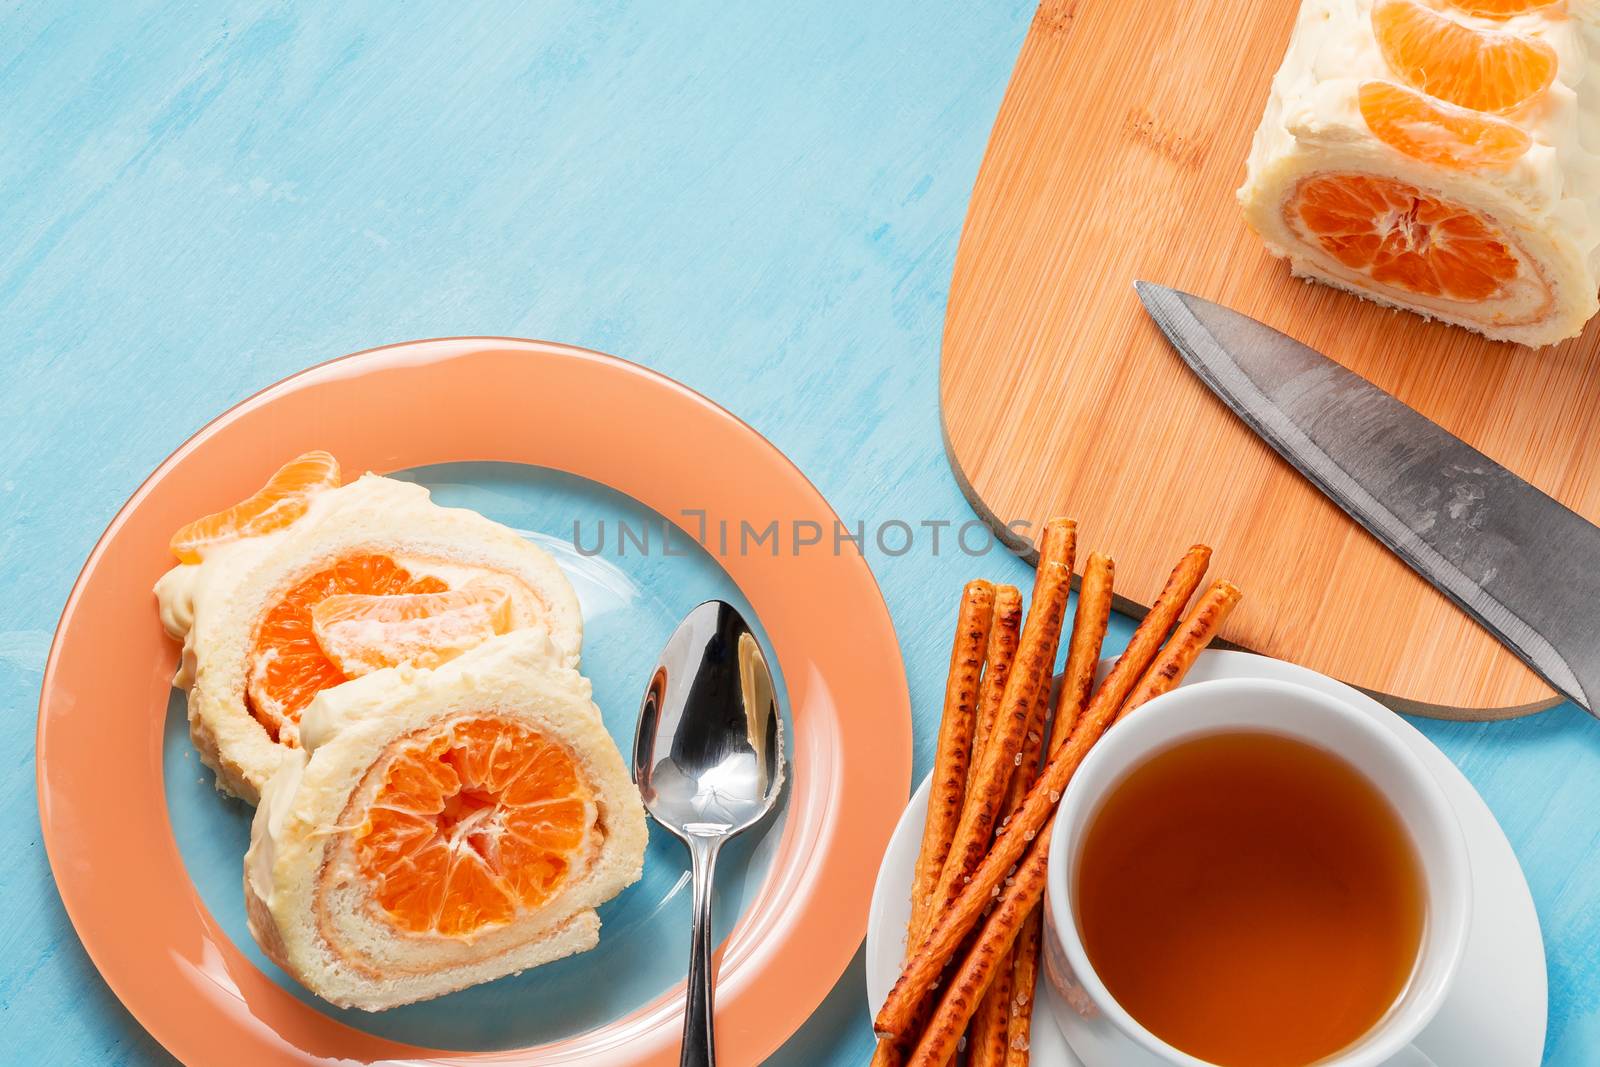 Sweet roll with whipped cream and tangerine filling and a cup of tea.